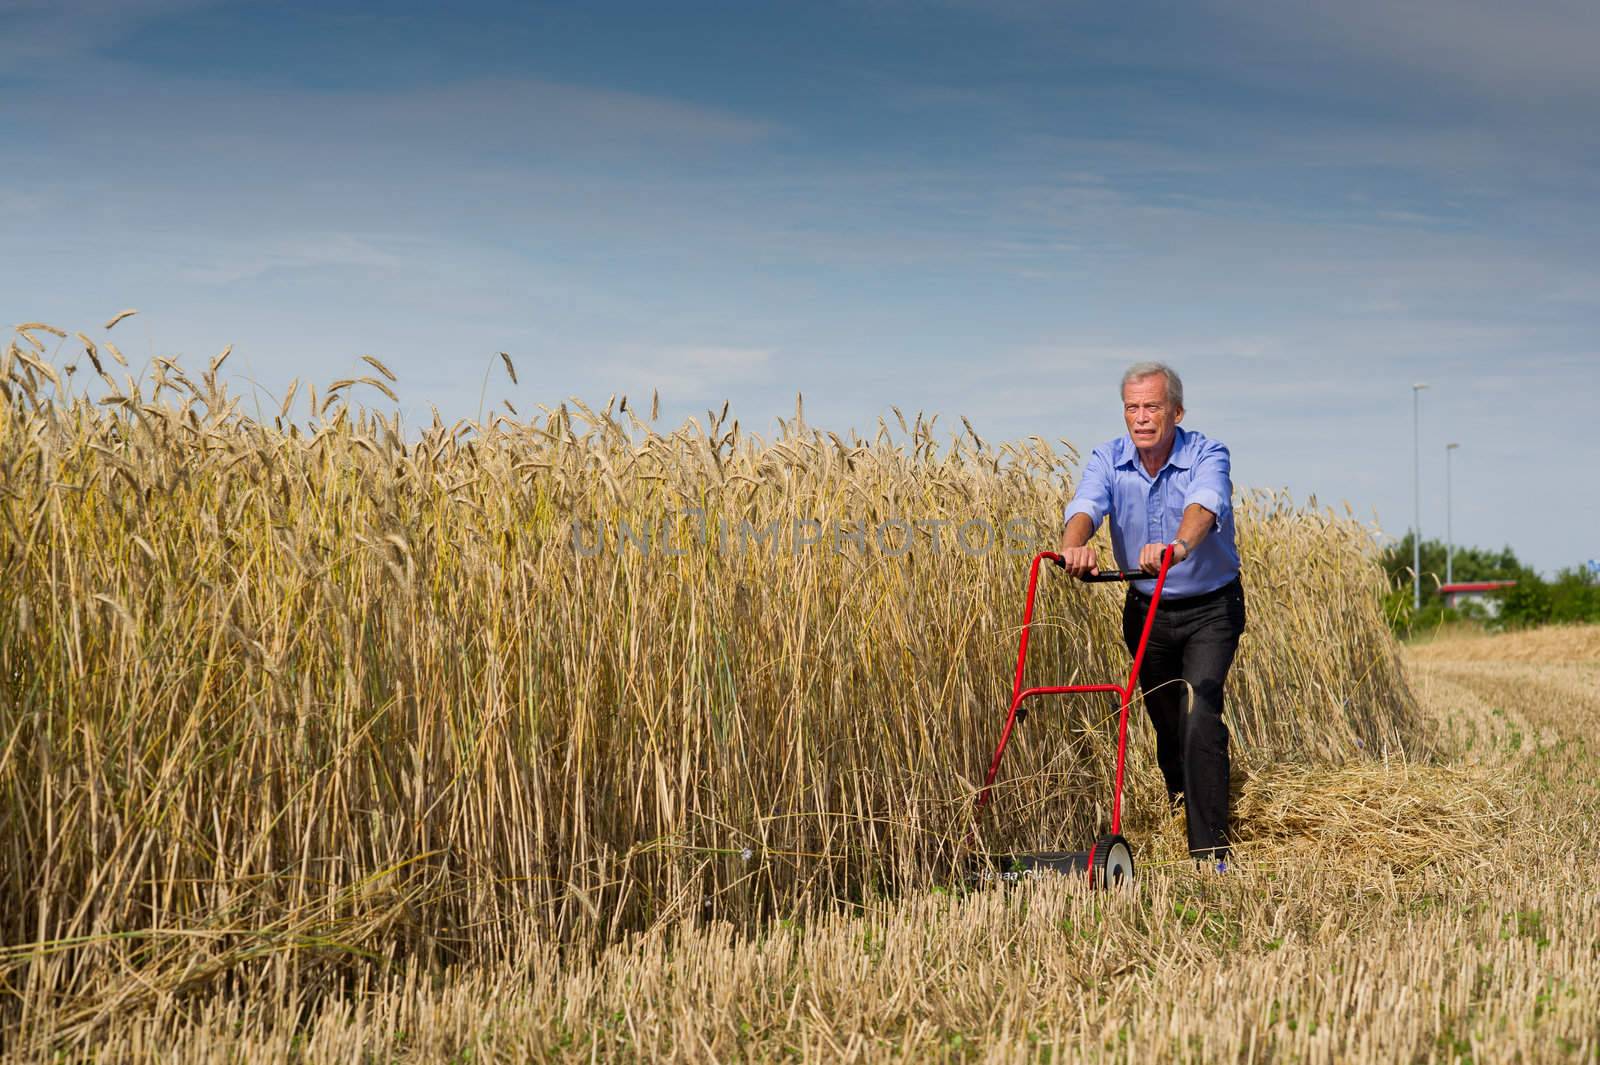 Senior businessman embarking on a new challenge as he starts to harvest his field of ripe golden grain using just a push type manual lawnmower filled with determination to succeed